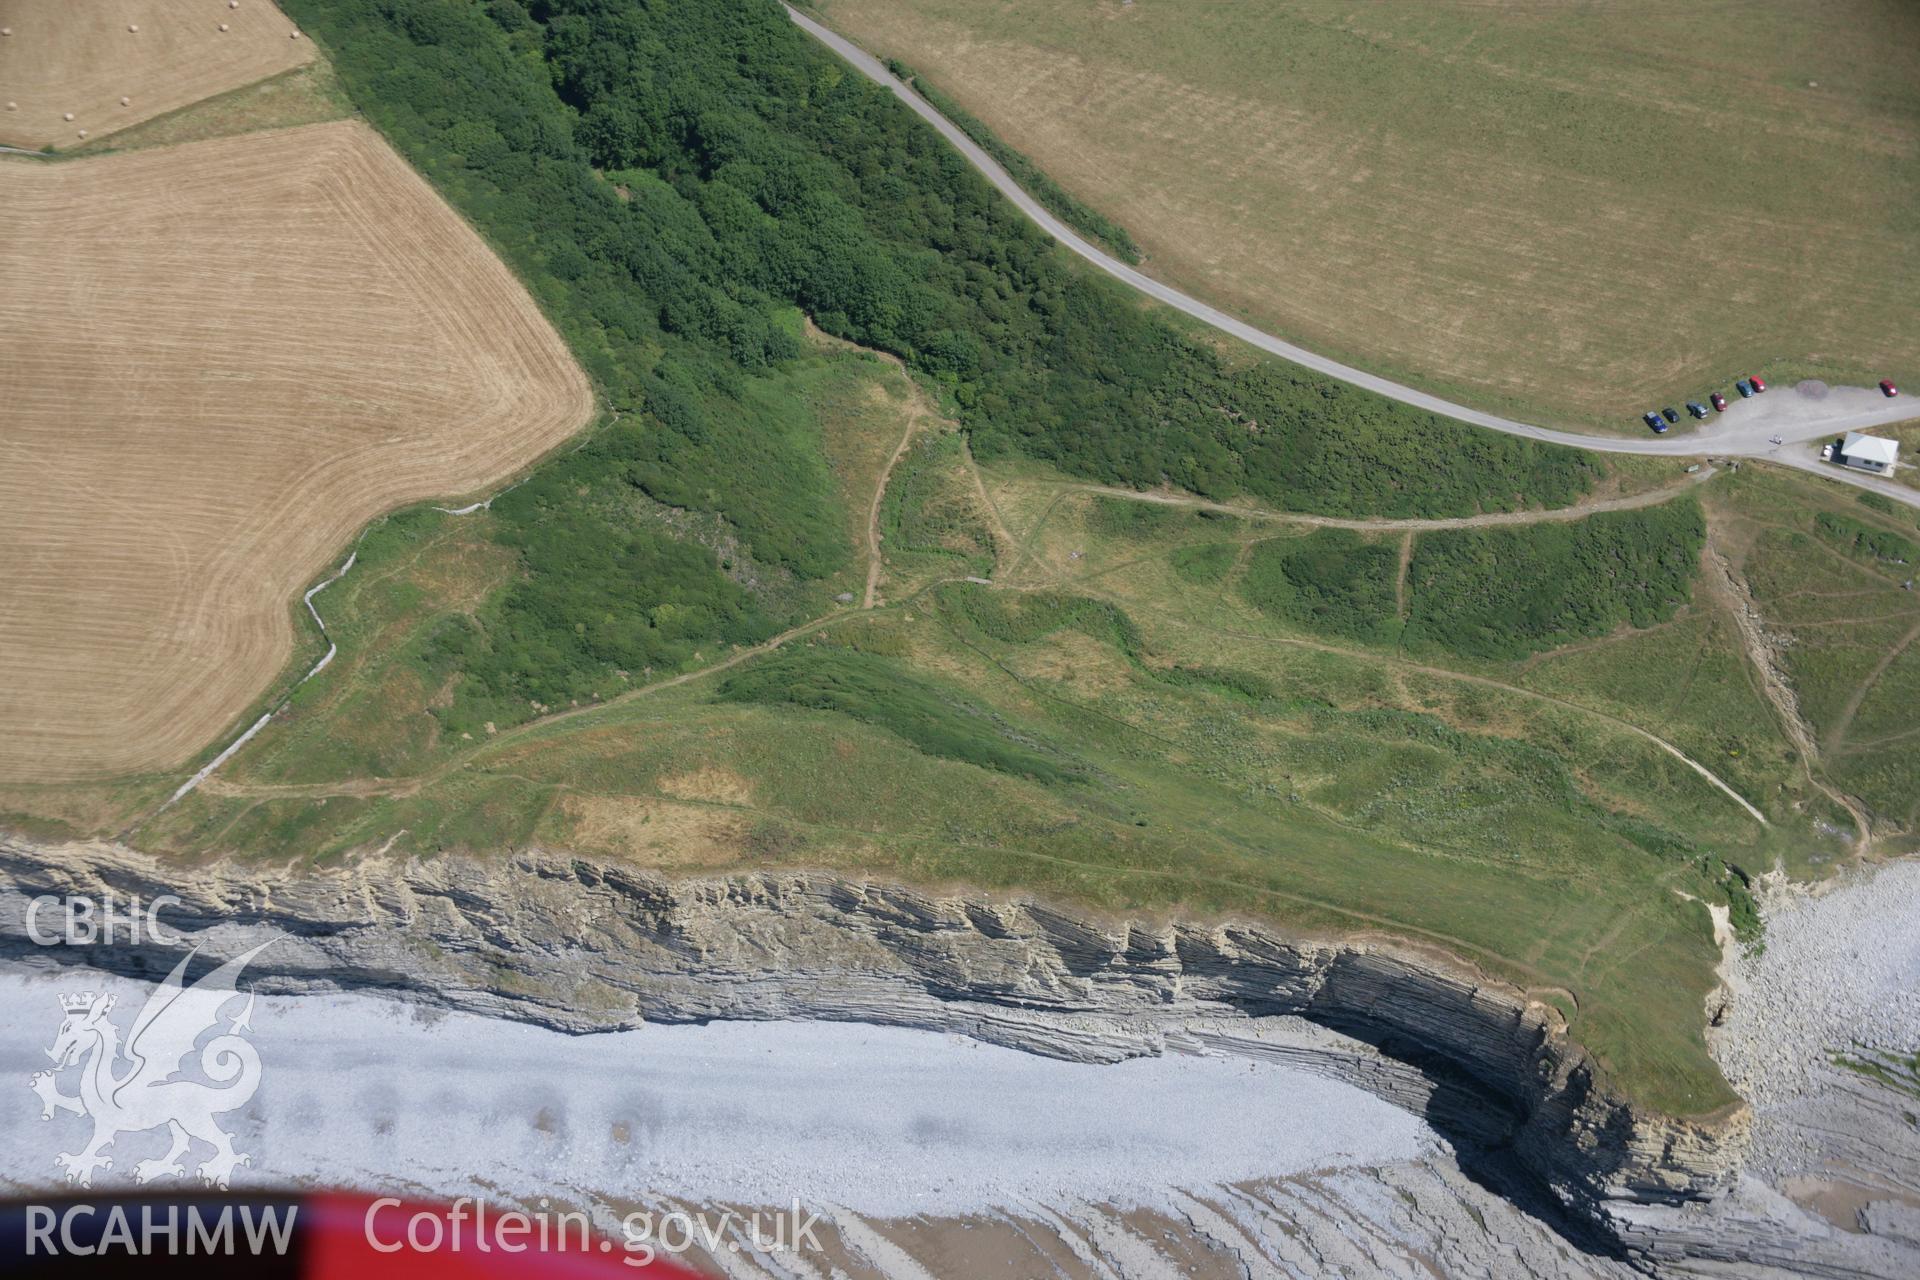 RCAHMW colour oblique aerial photograph of Nash Point Promontory Fort. Taken on 24 July 2006 by Toby Driver.